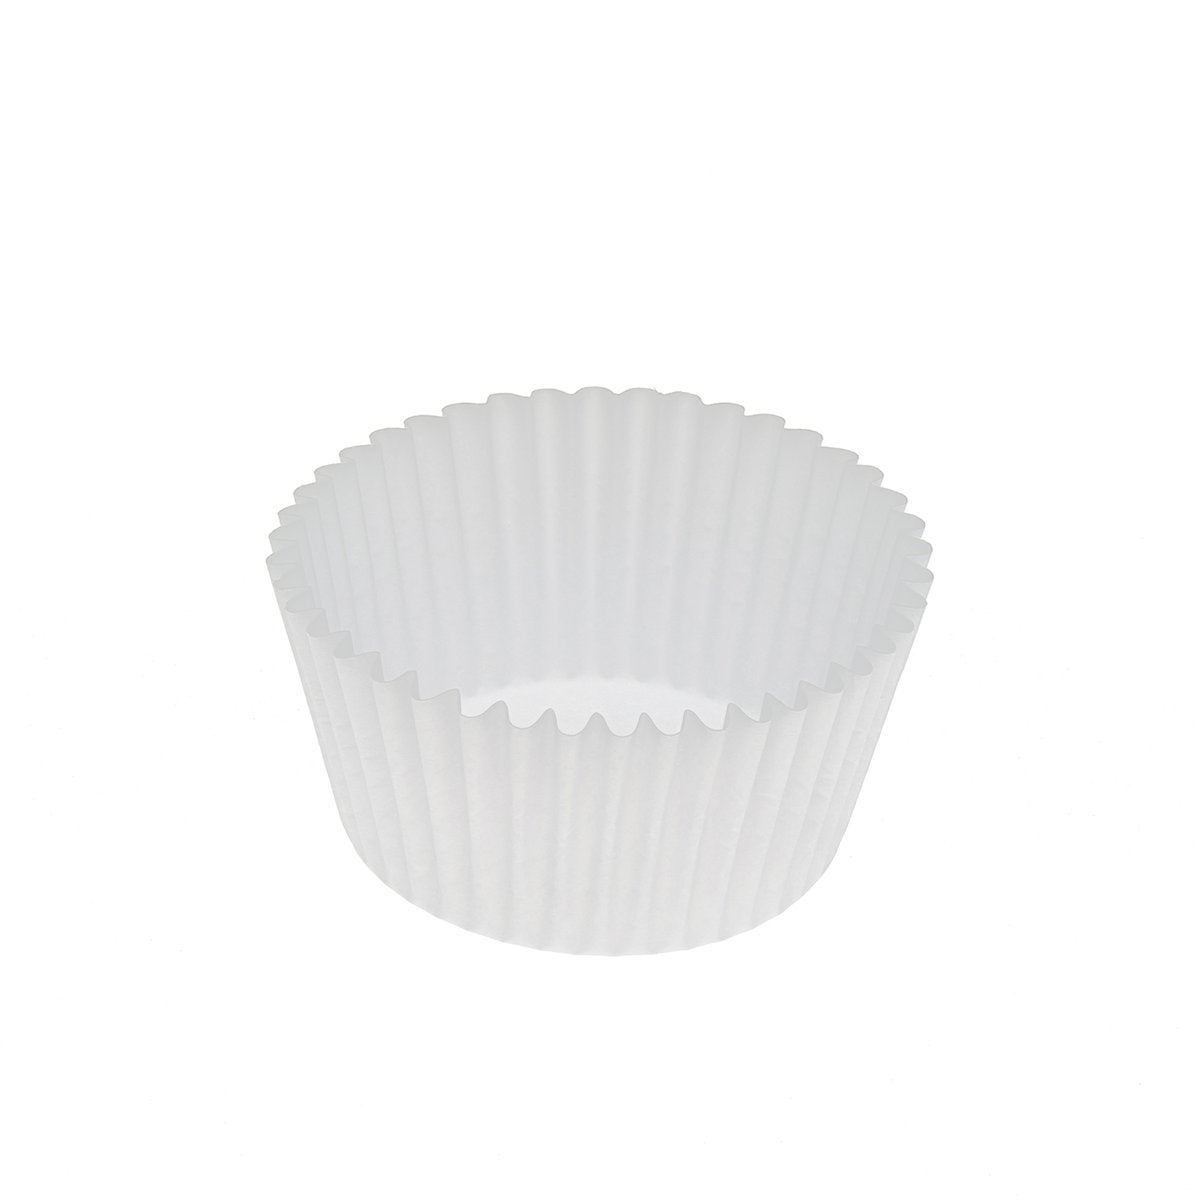 4.5 White Baking Paper Cup Bulk, Bakery Paper Cup